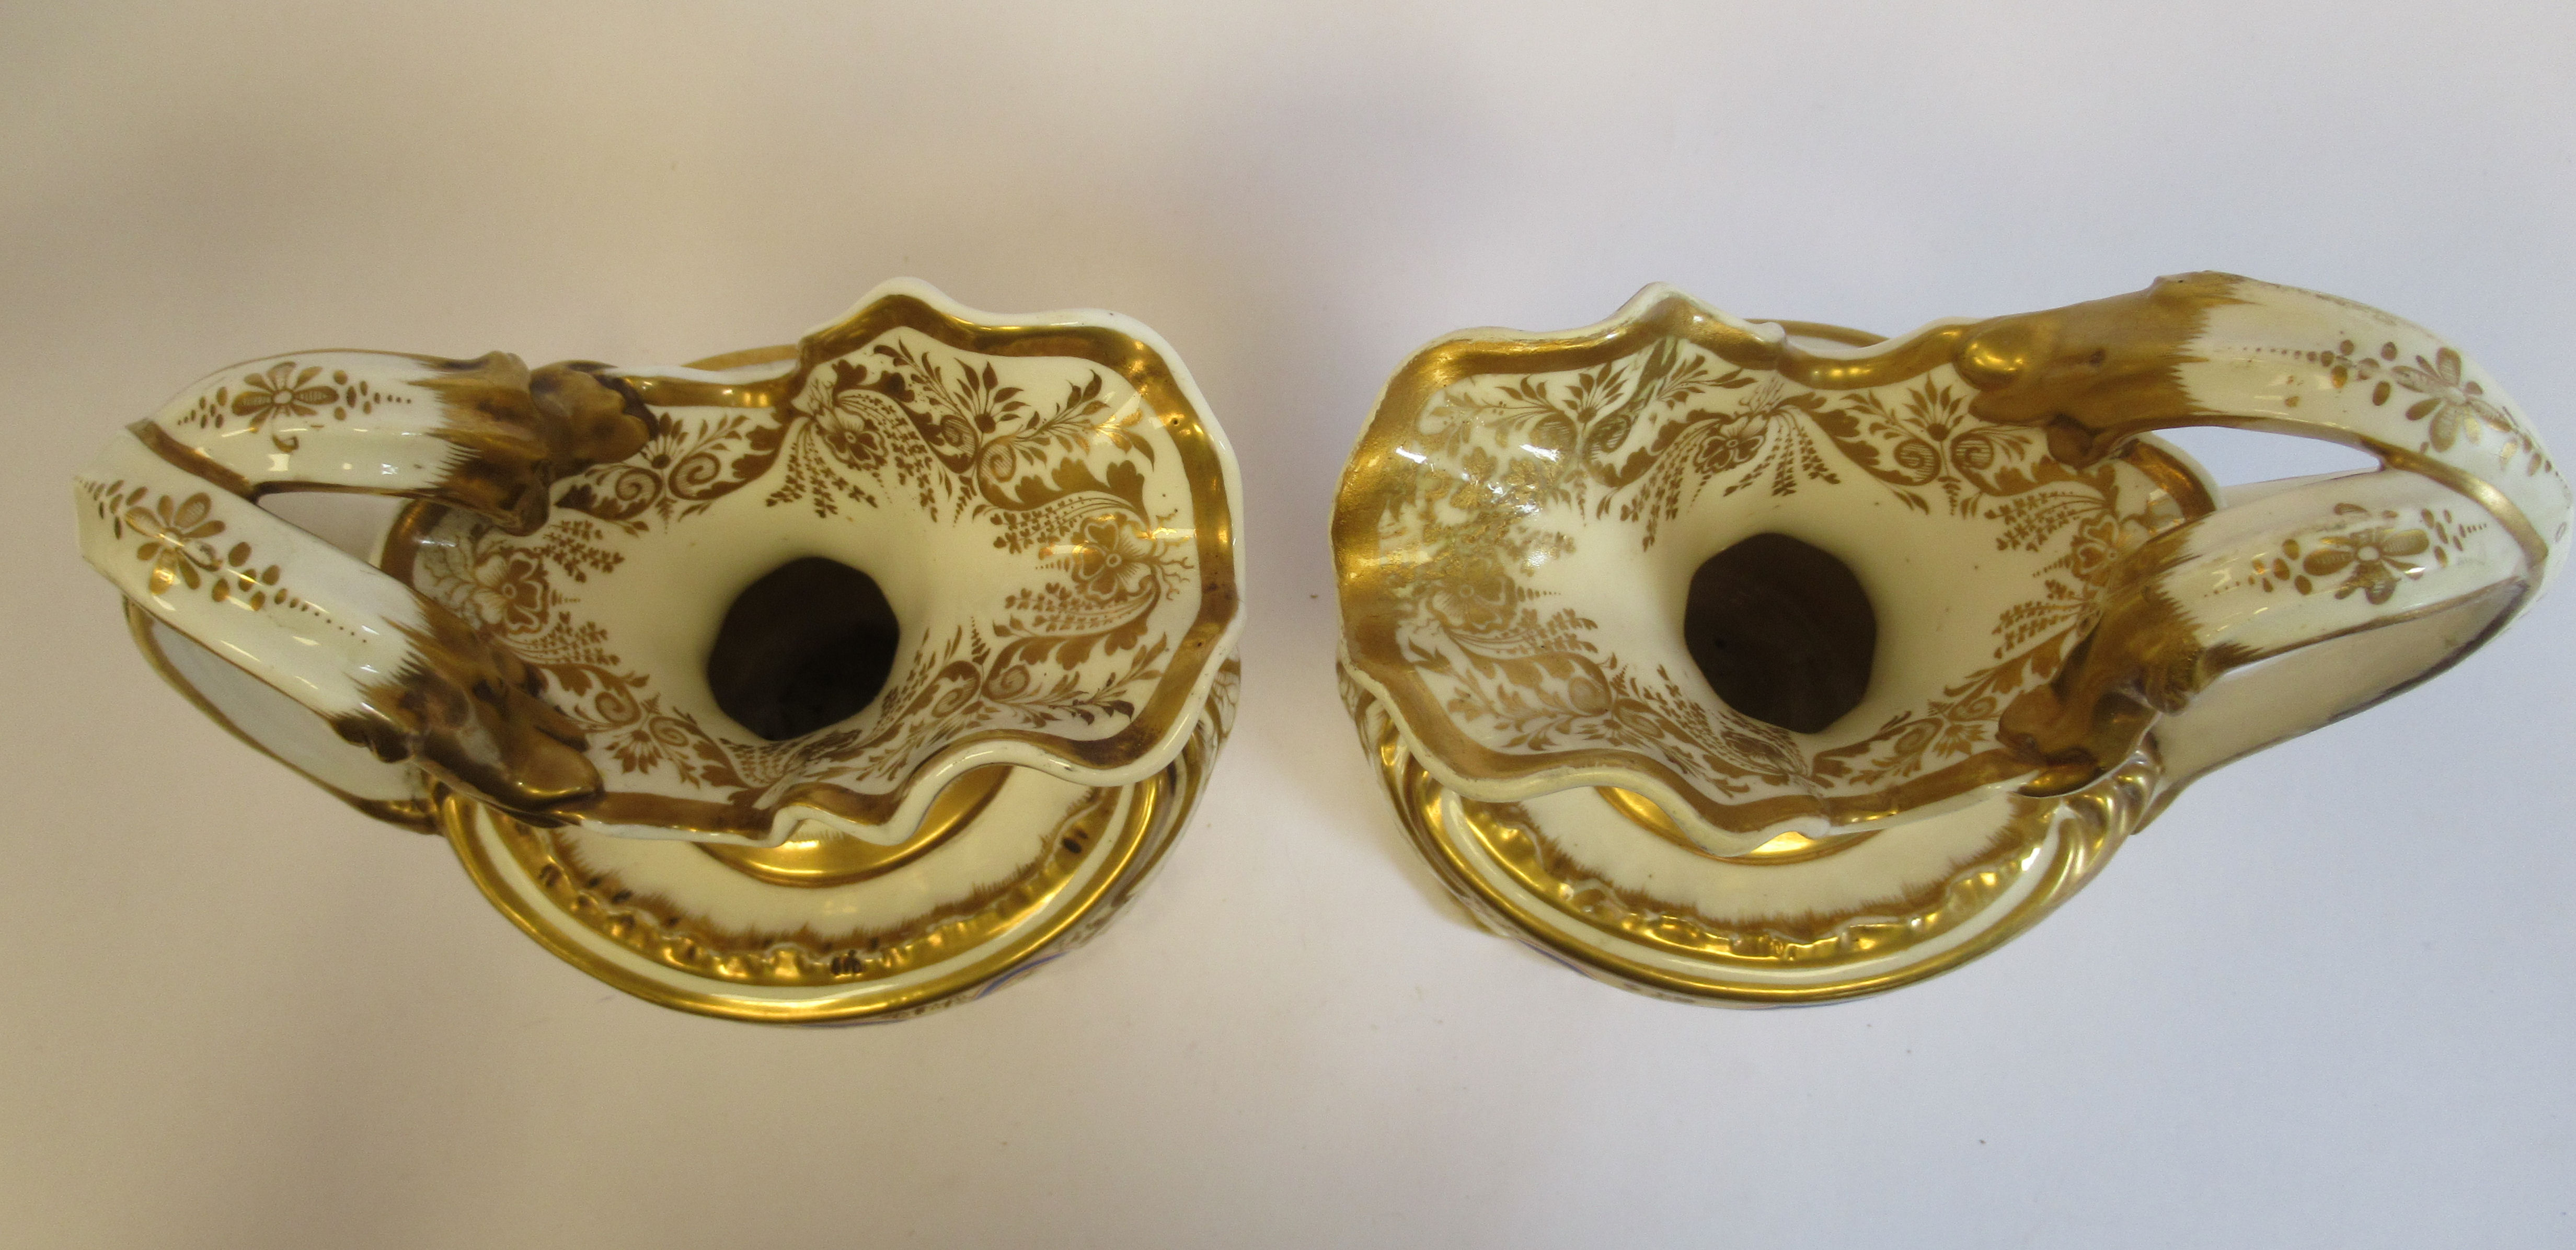 A pair of Copeland Garrett Felspar porcelain ewers with bowl shaped bodies and drawn loop handles, - Image 3 of 6